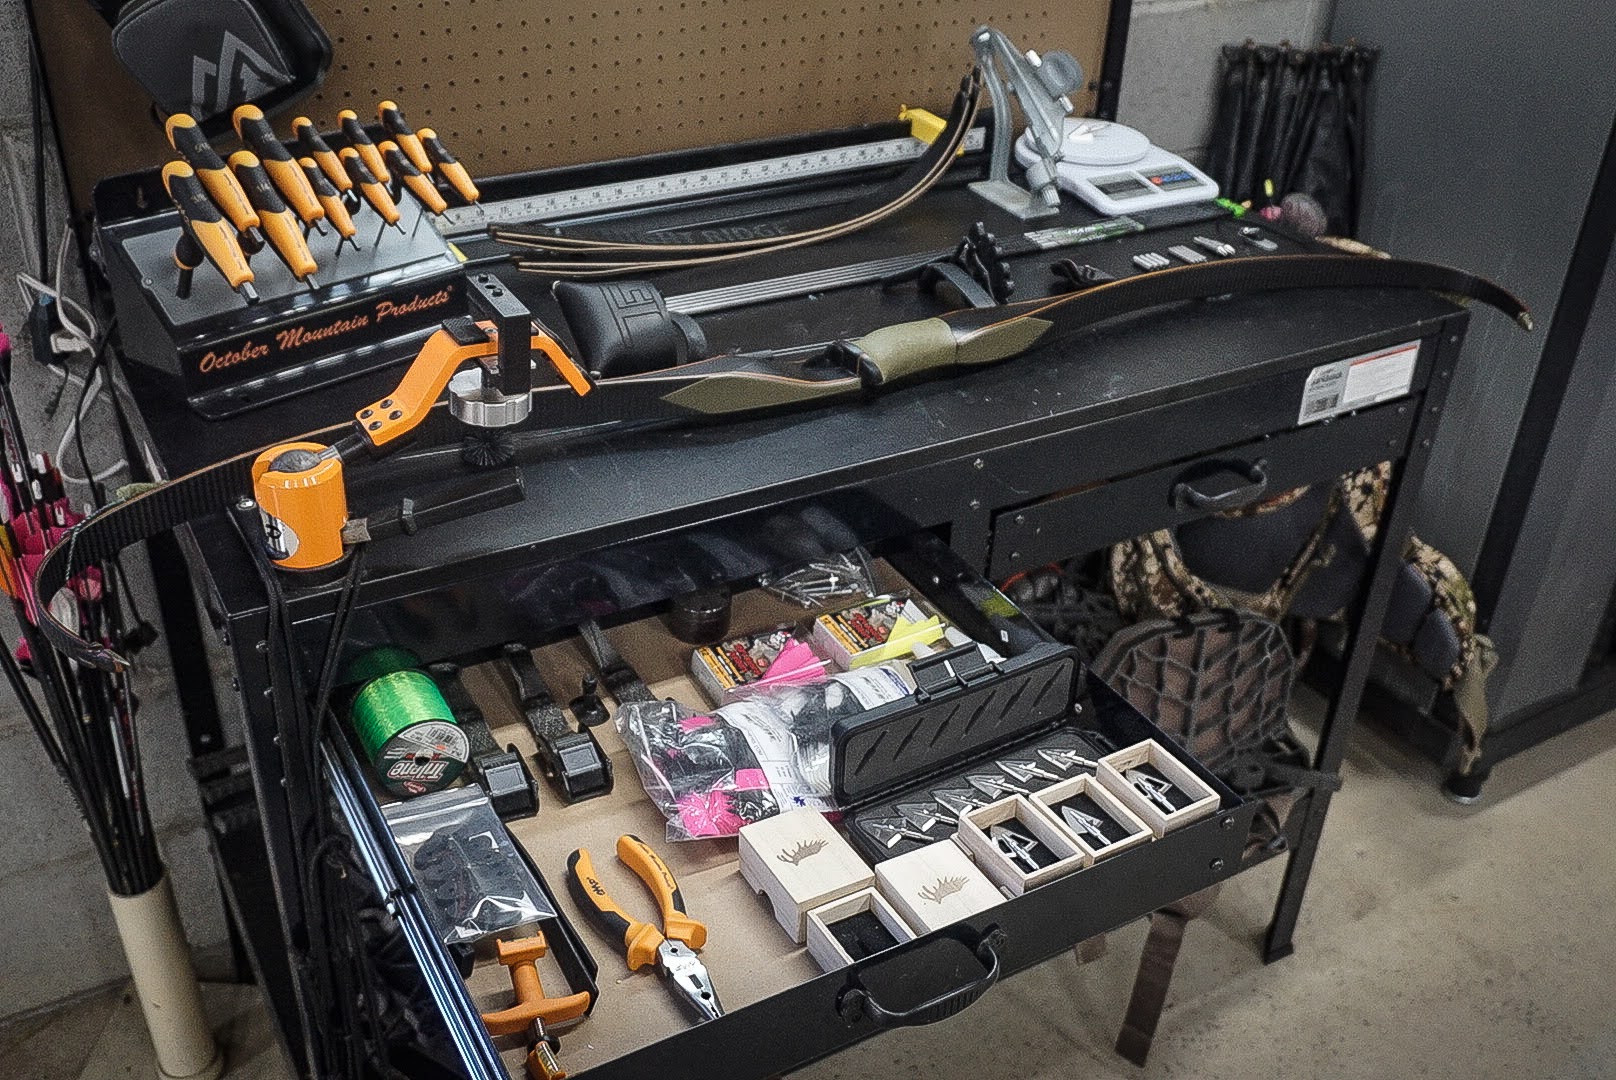 Luminans immunisering pensionist Top 6 Must-Have Tools for Your DIY Bow Shop | October Mountain Products